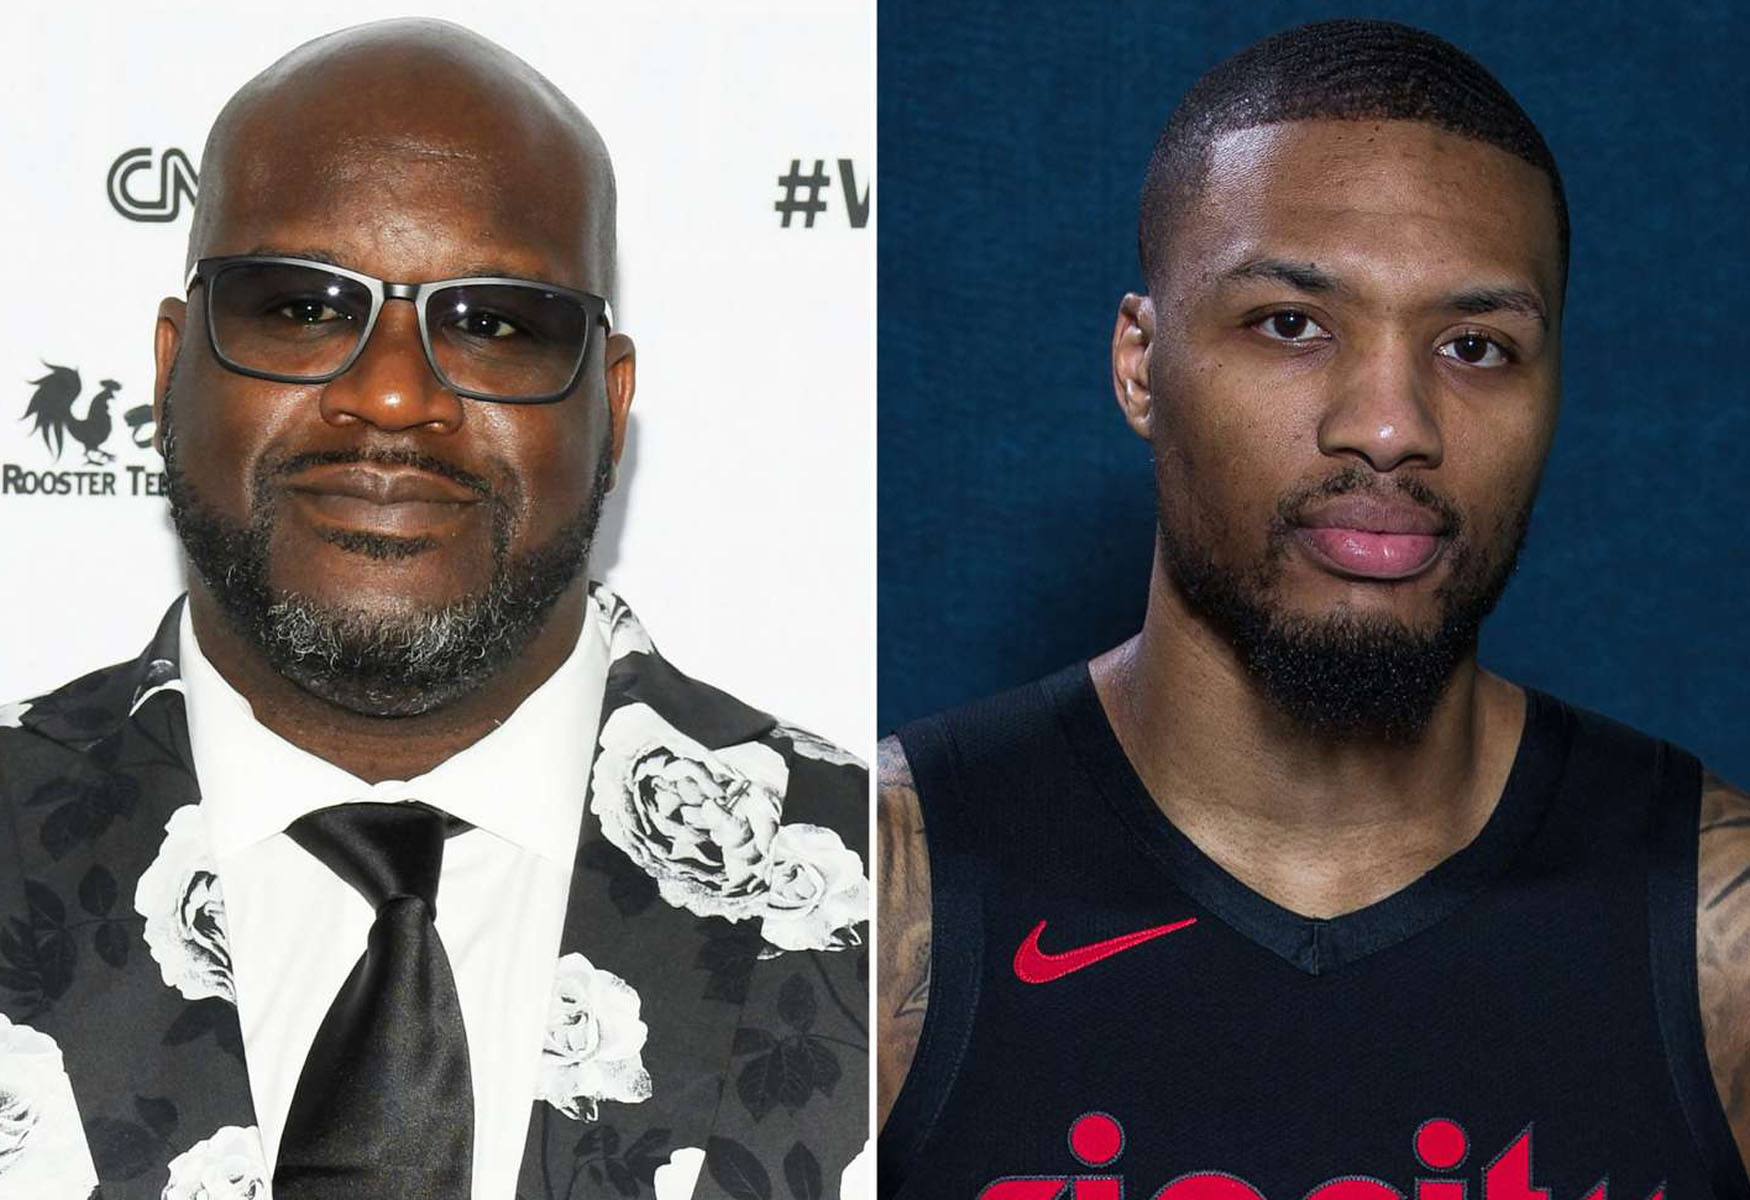 Shaq Claims To Be The Best Athlete-Rapper Ever, Acknowledges Damian Lillard’s Talent